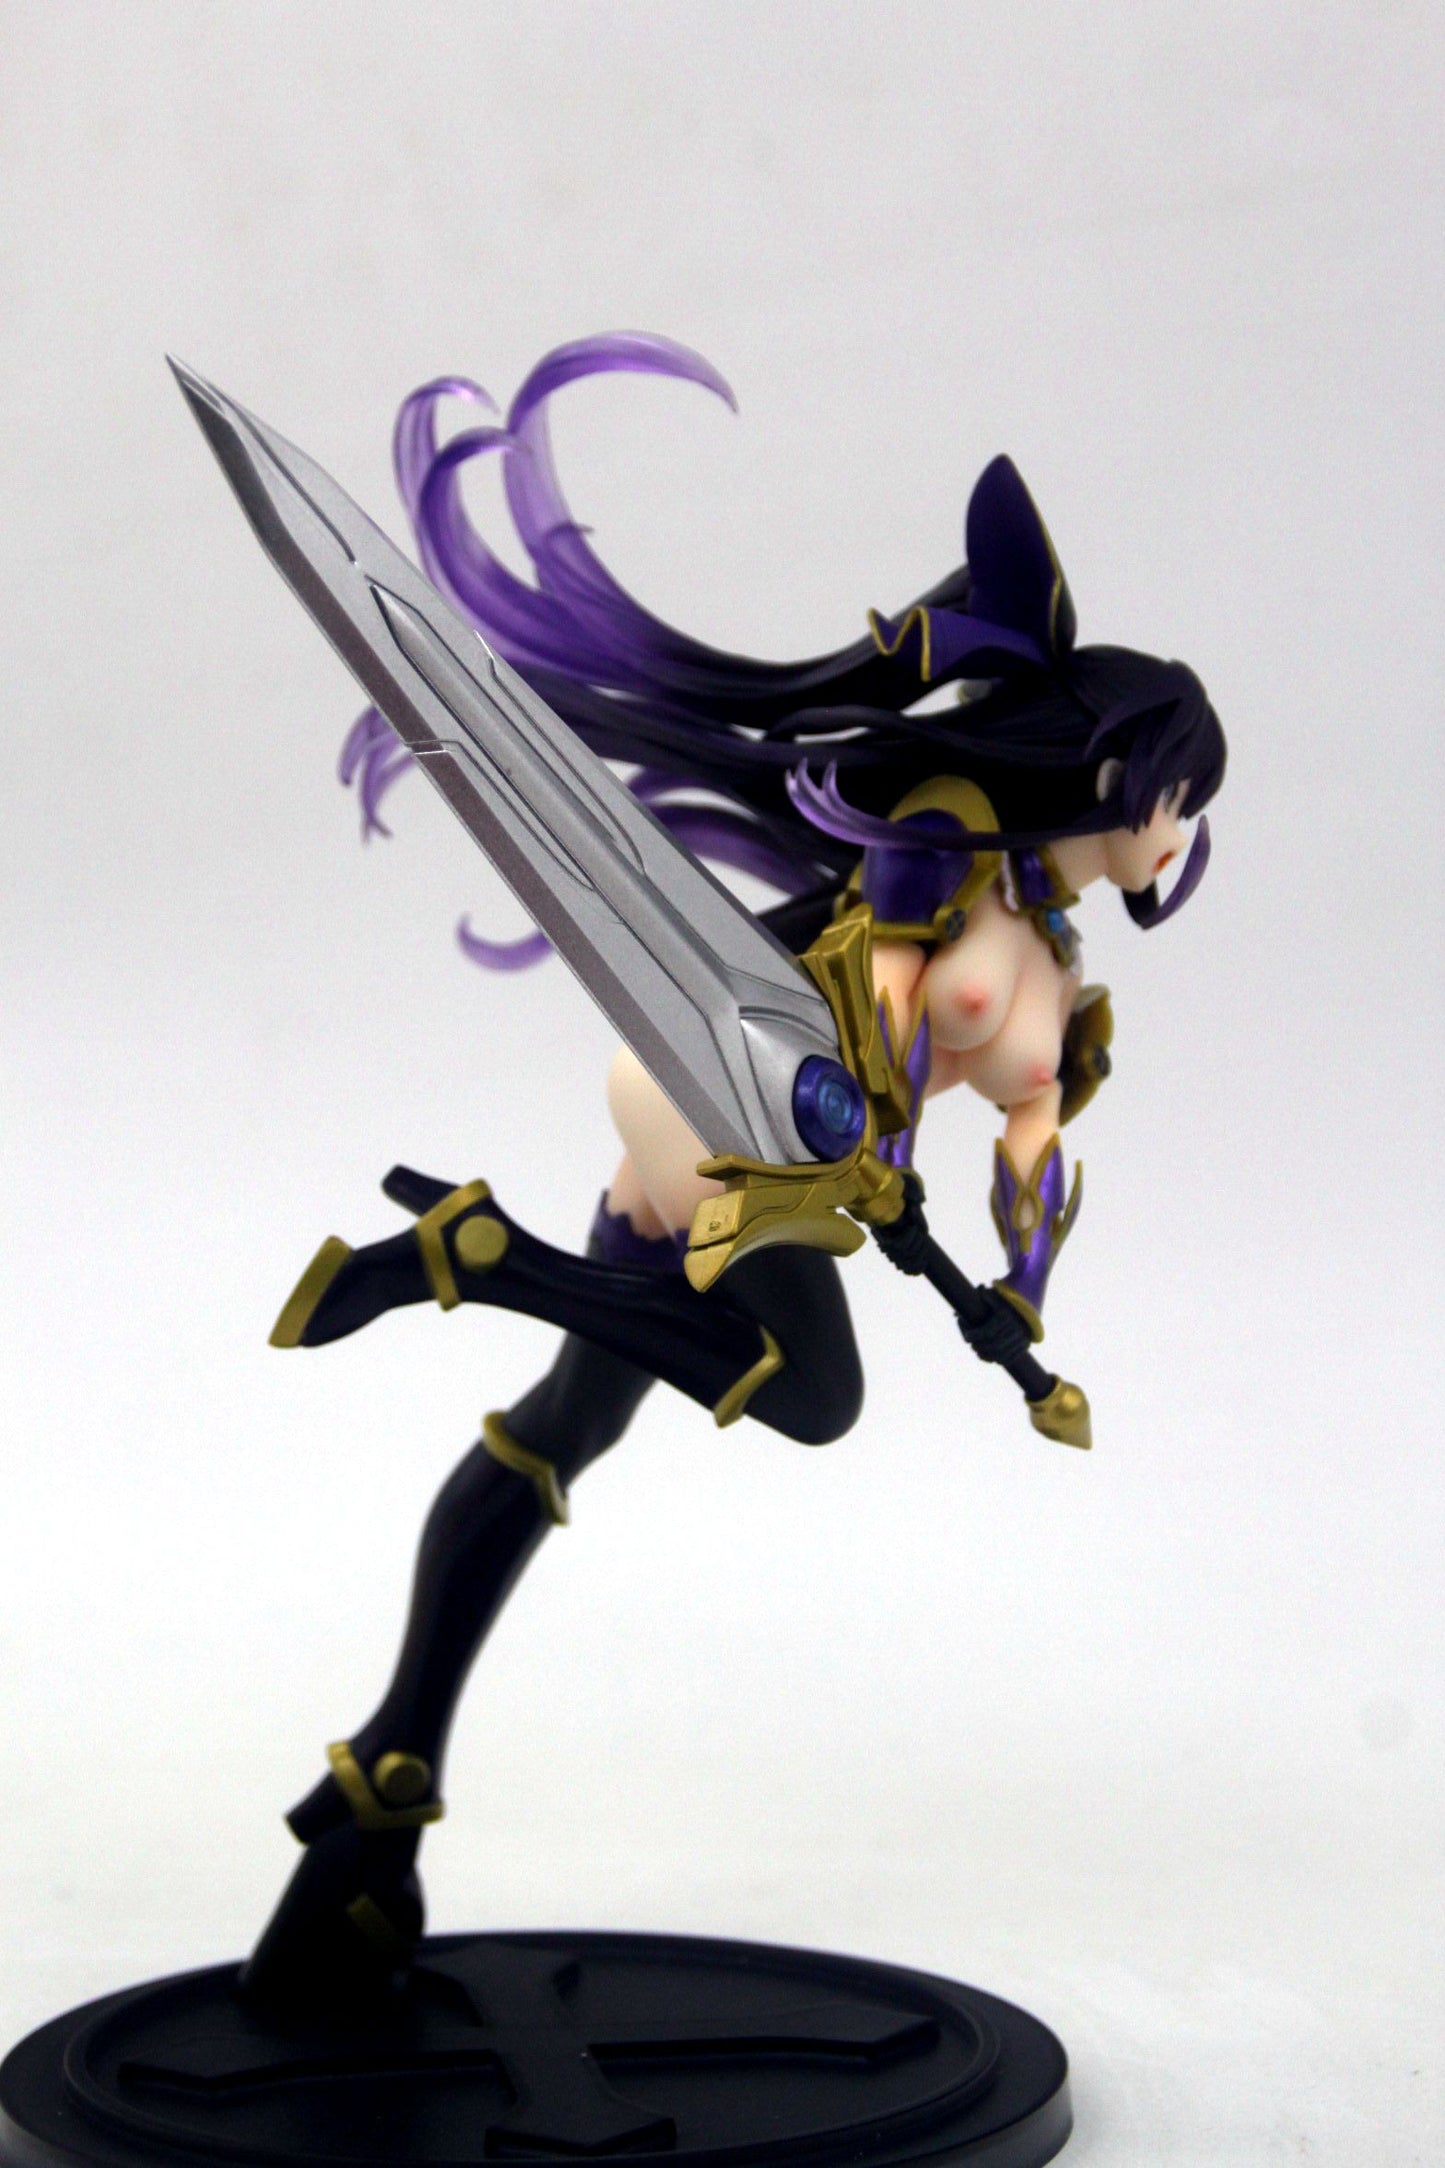 Date A Live: Tohka Yatogami 1/6 naked anime girl figure collectible action figures